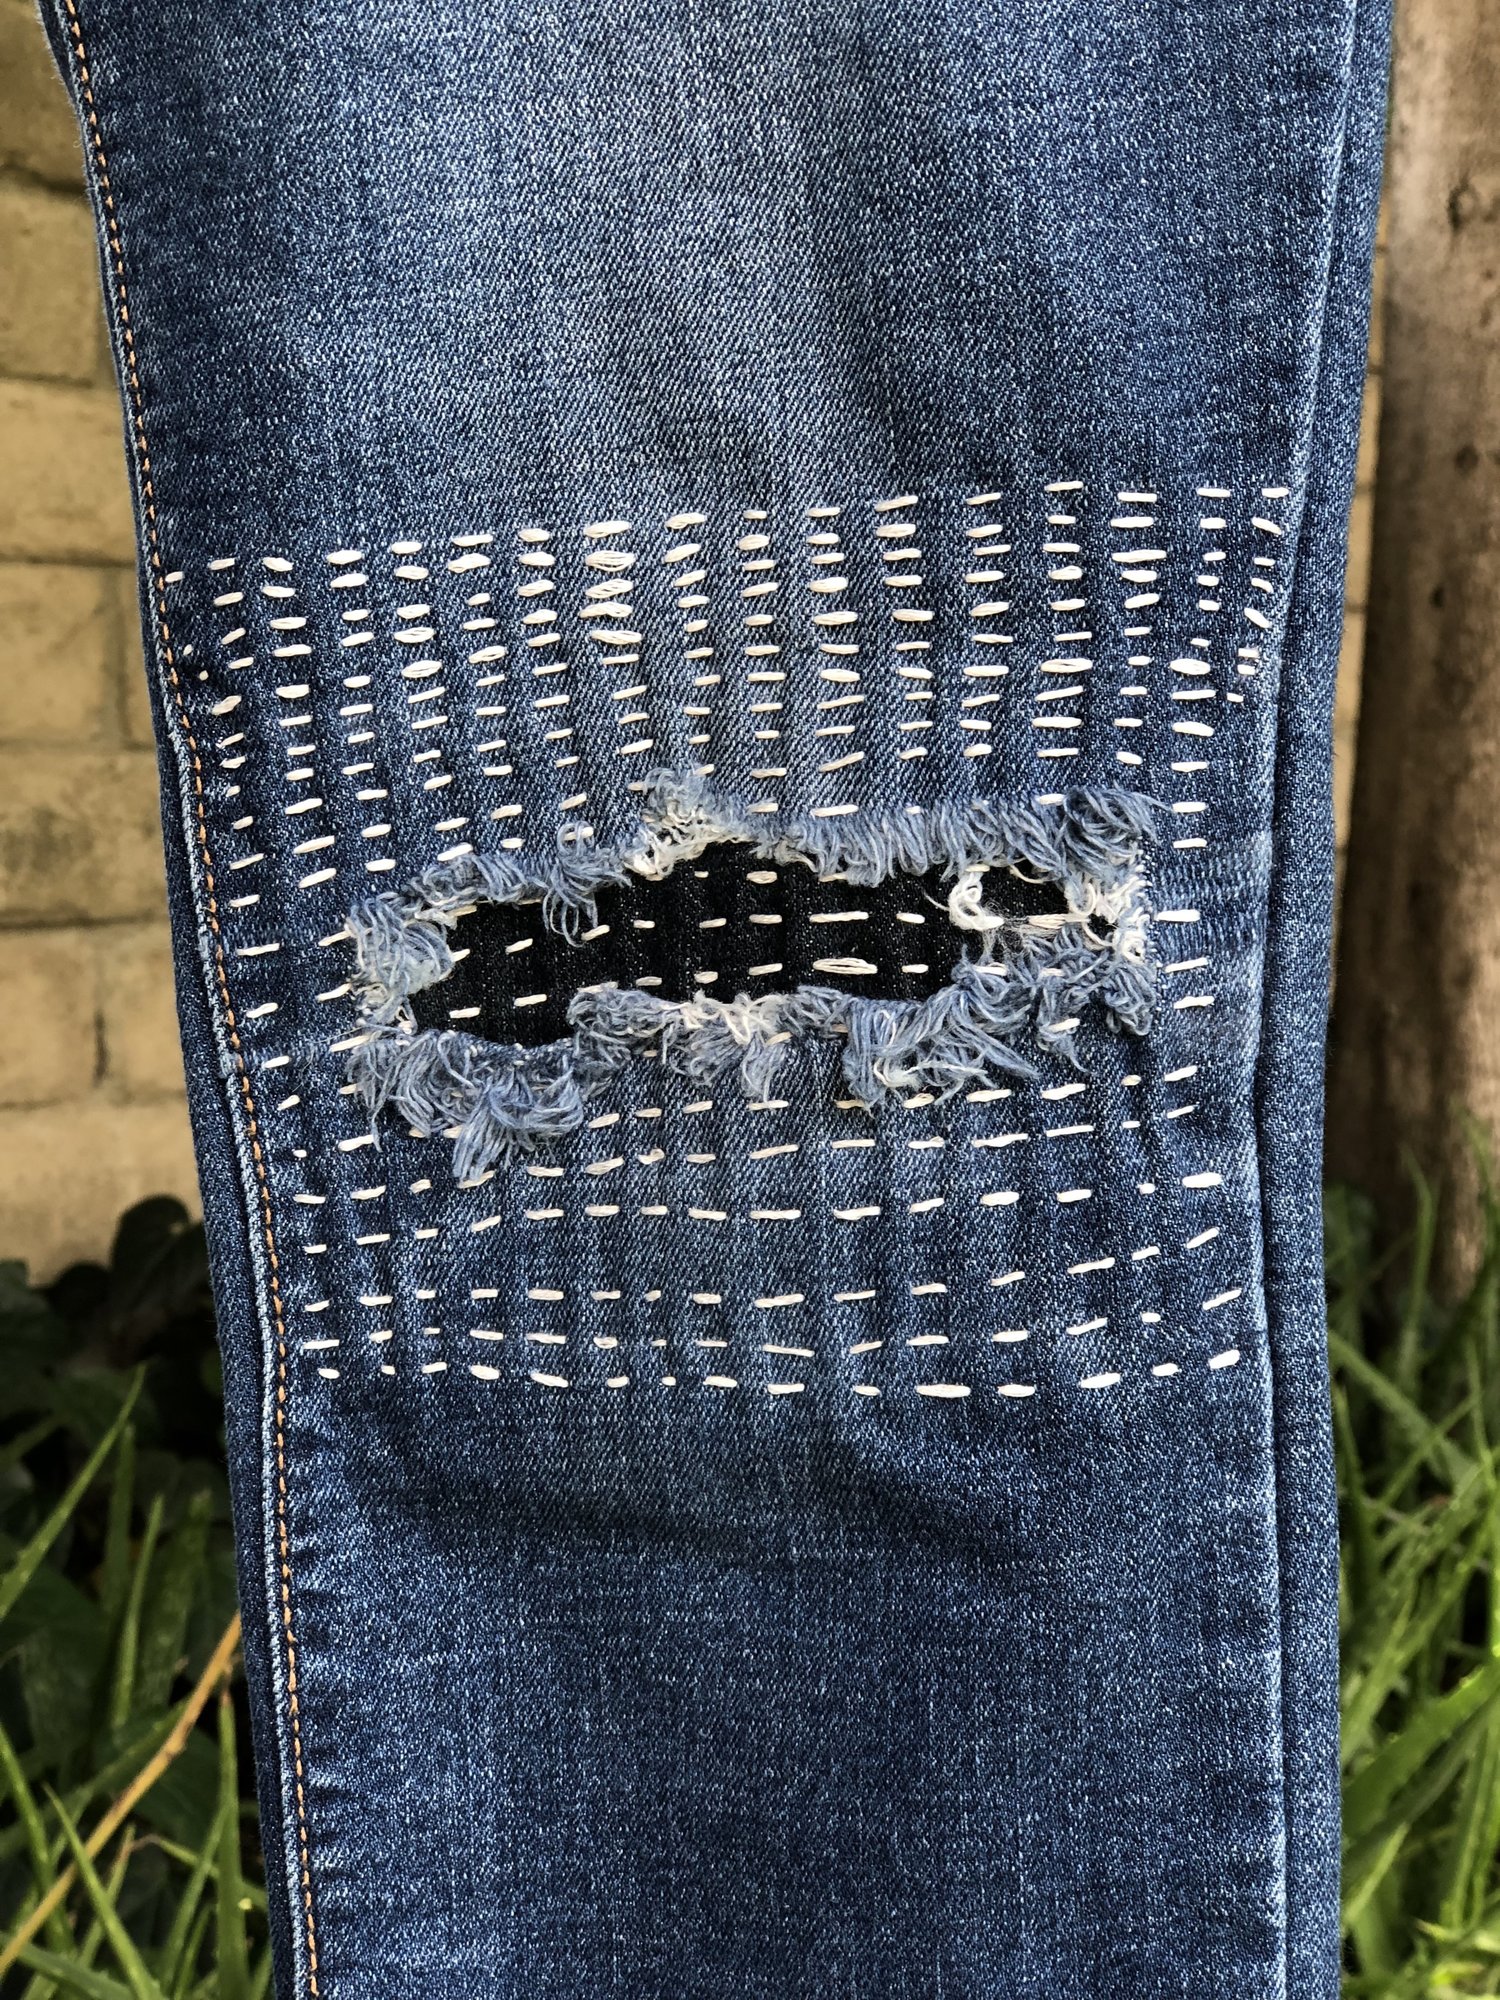 Boro stitched jeans fix up : r/Embroidery